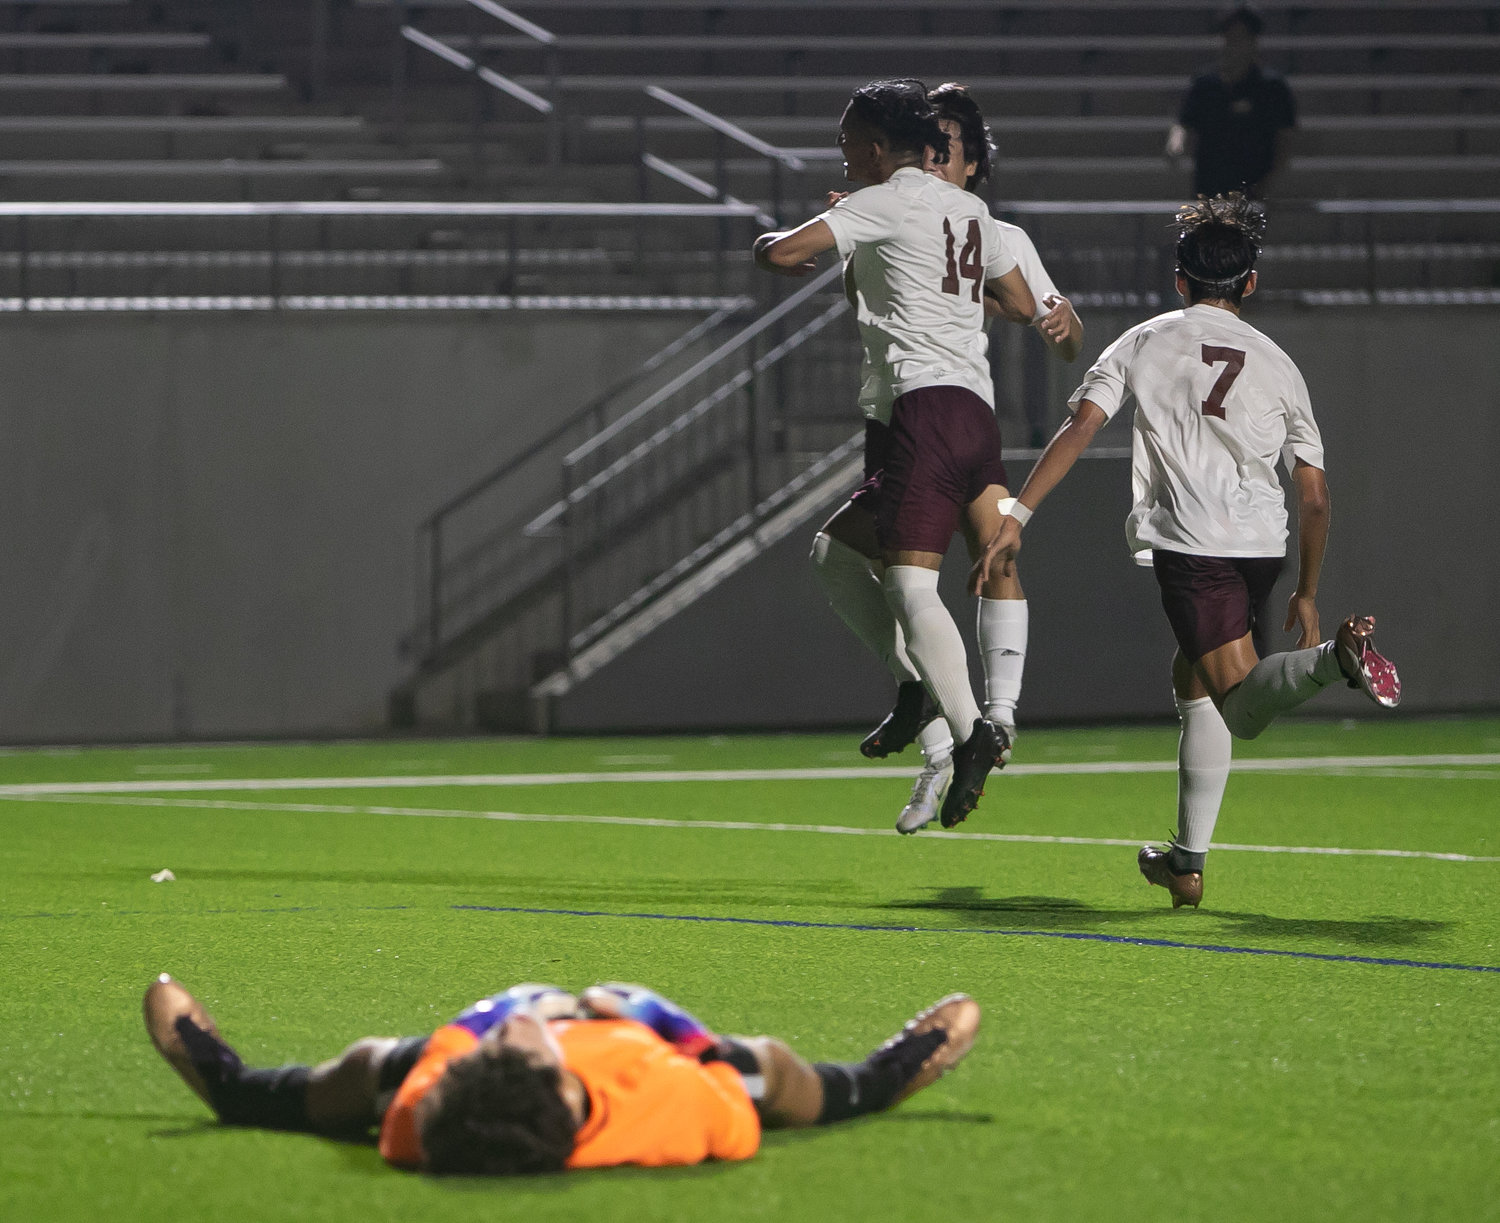 Gabriel Gonzlaez and teammates reel away in celebration after scoring during Friday's Class 6A Regional Quarterfinal game between Seven Lakes and Cinco Ranch at Legacy Stadium.